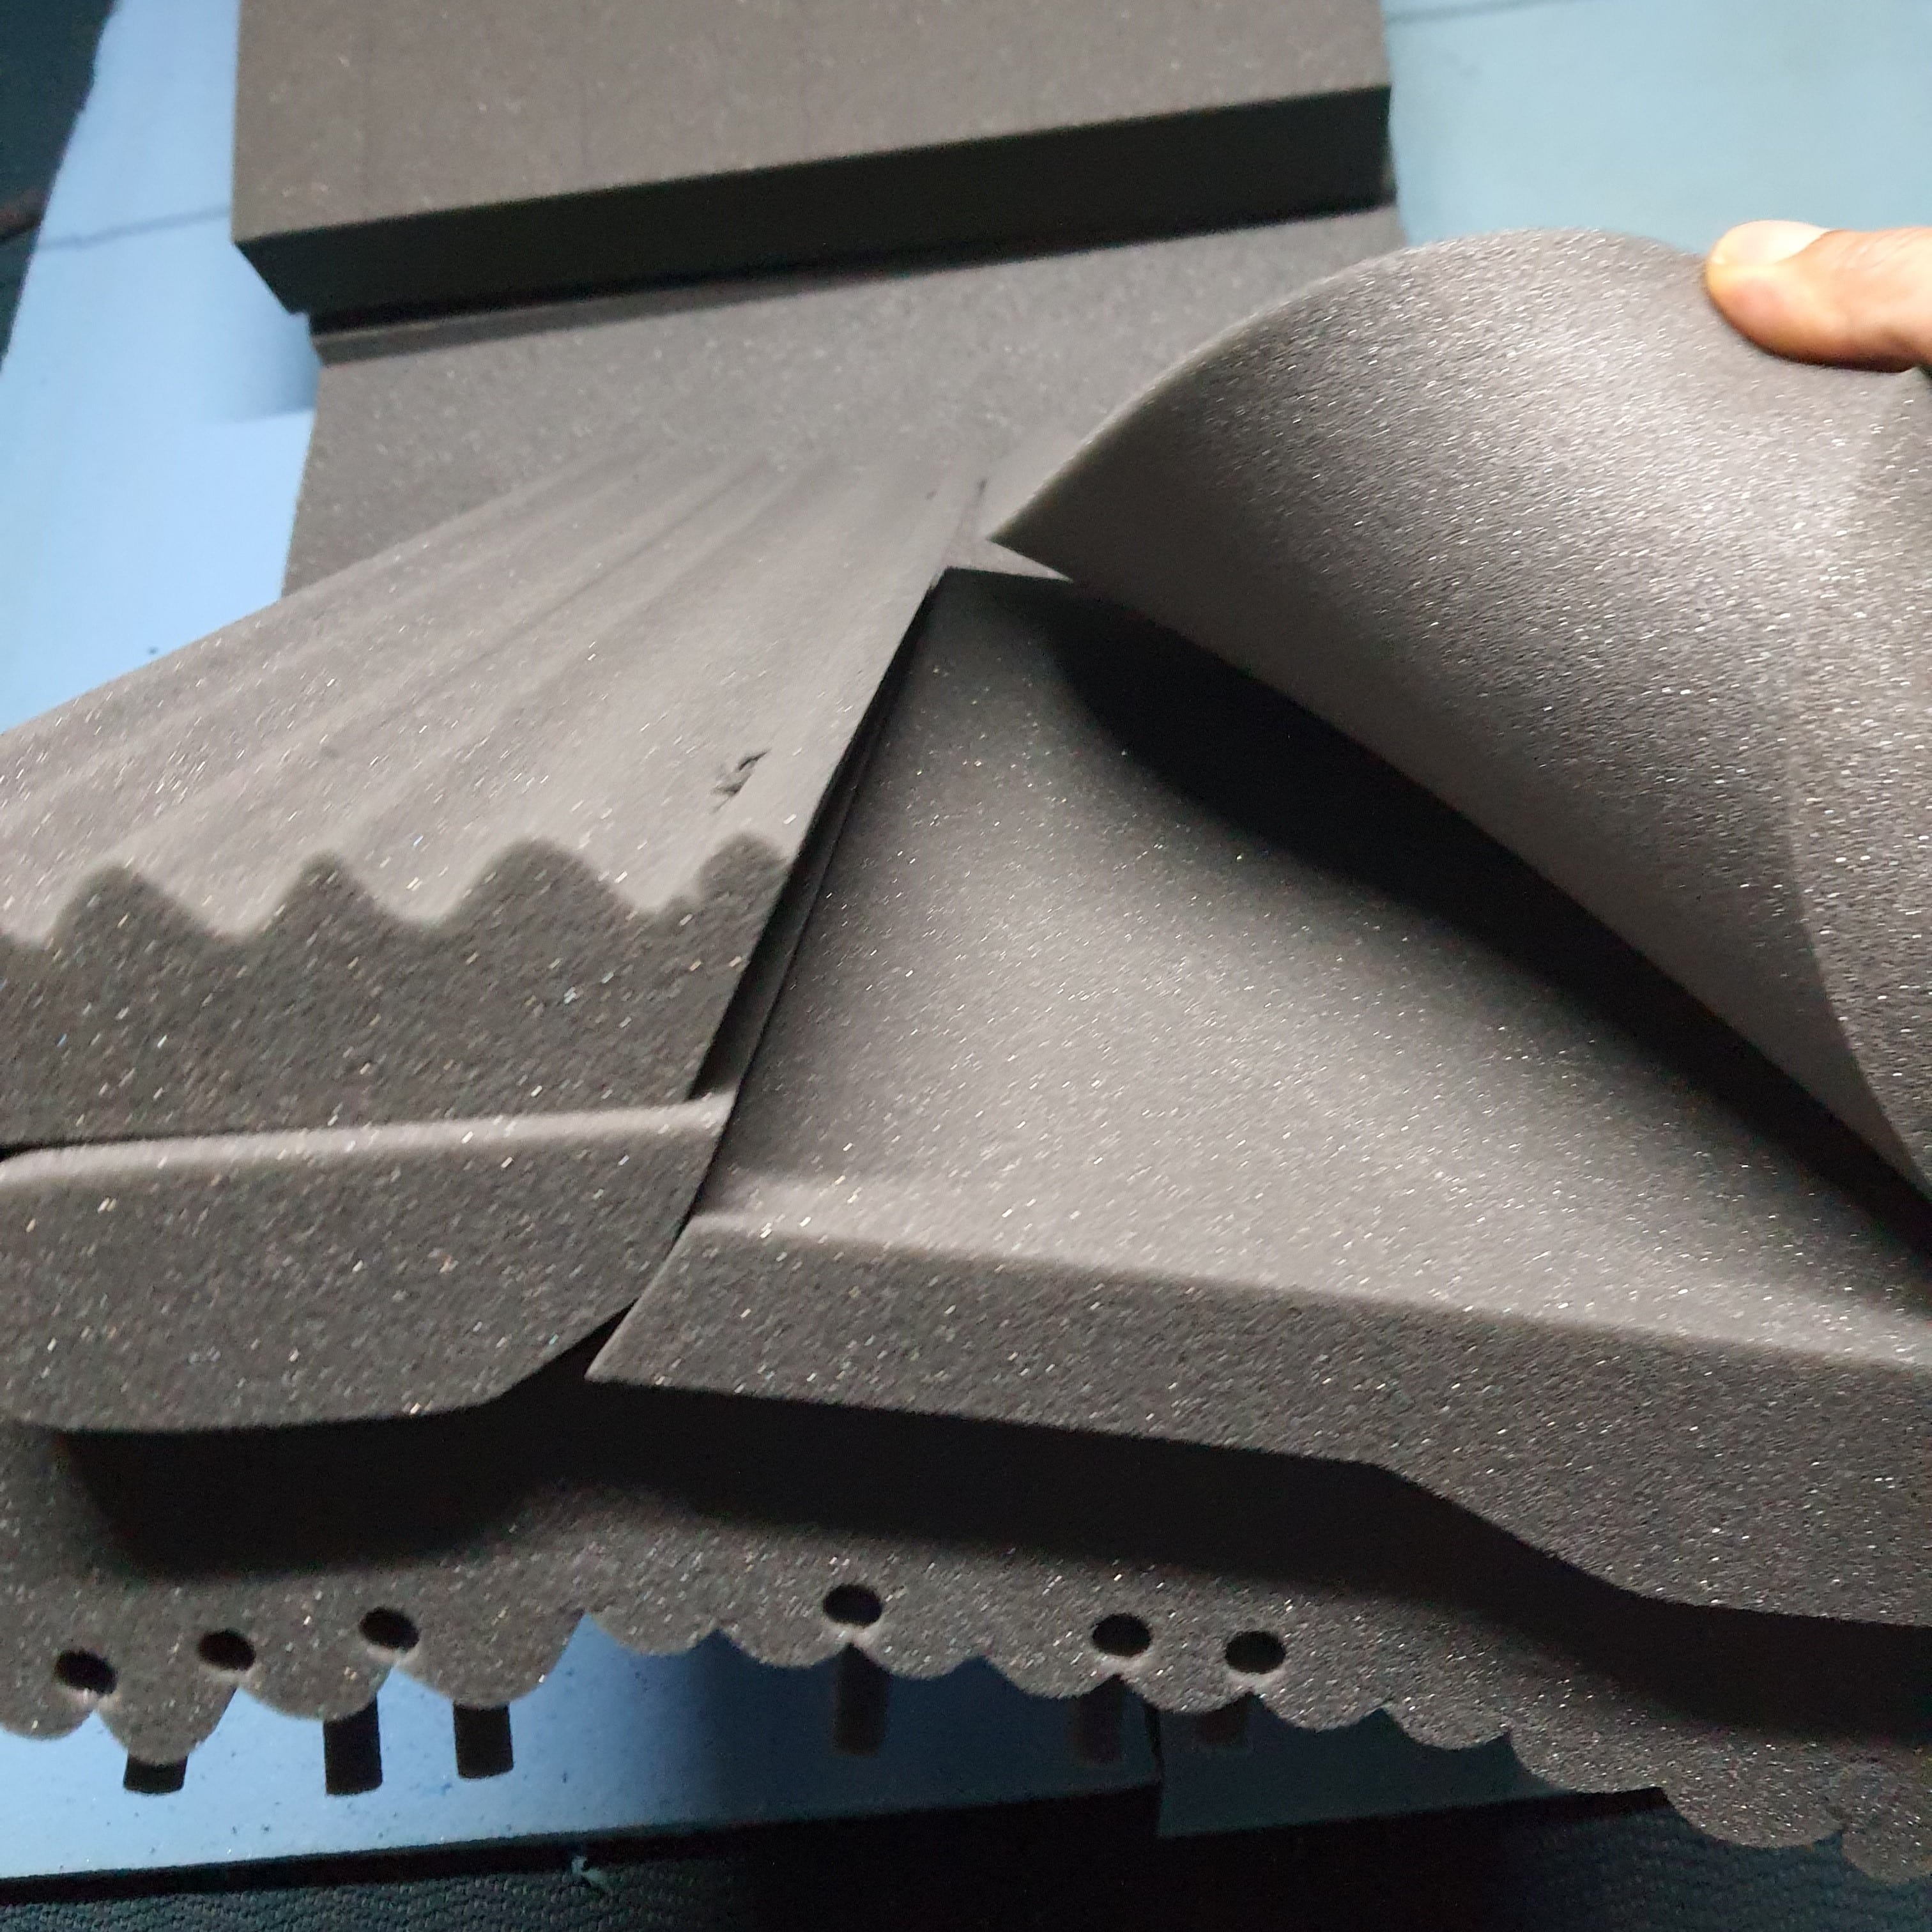 Reinforced Polyurethane Foam Board Good price Excellent Materials Packaging Industry Professional Manufacturer High Quality